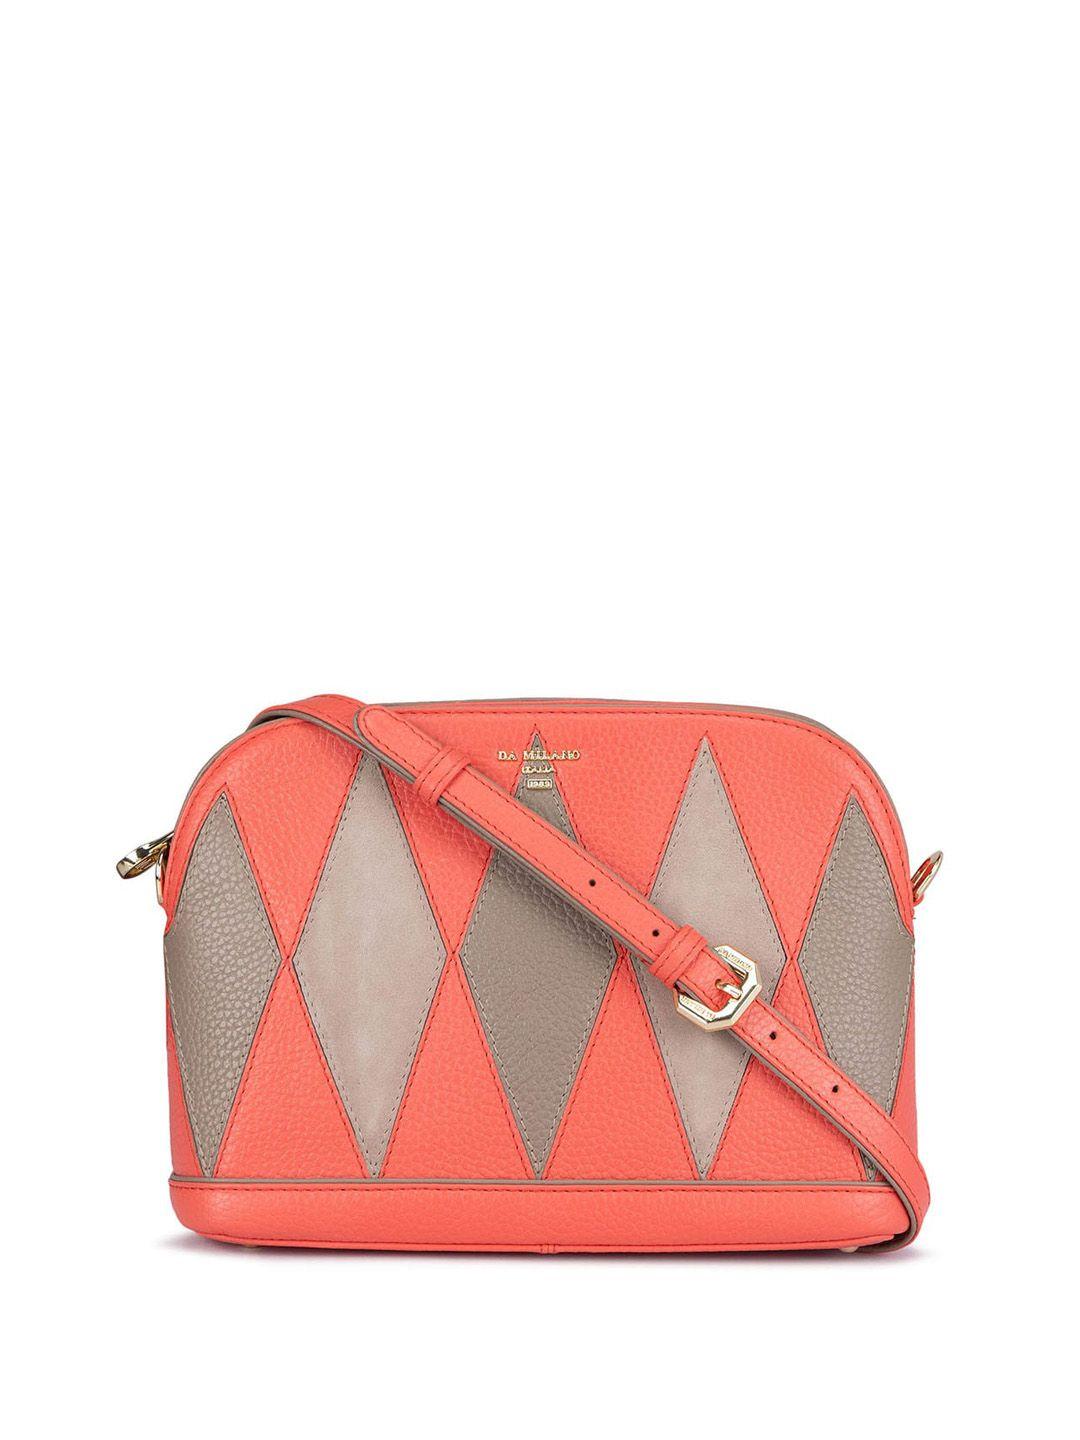 da milano textured colourblocked leather swagger sling bag